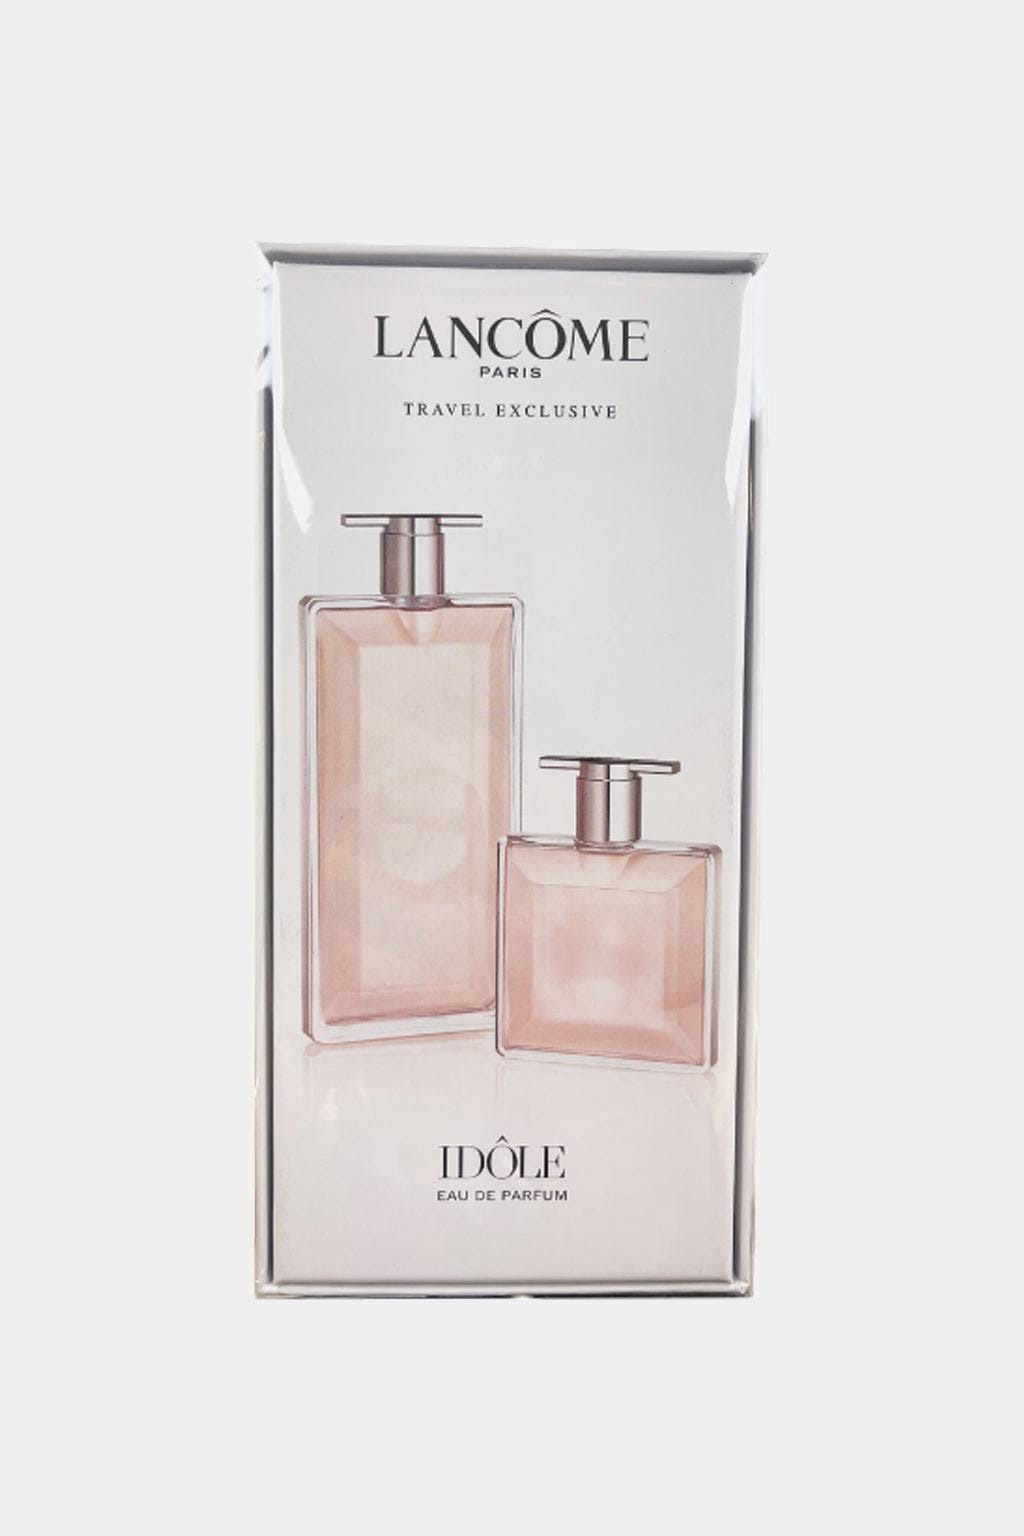 Lancome's Idole Perfume: Fresh and Intense, for Everyday Wear. | Image